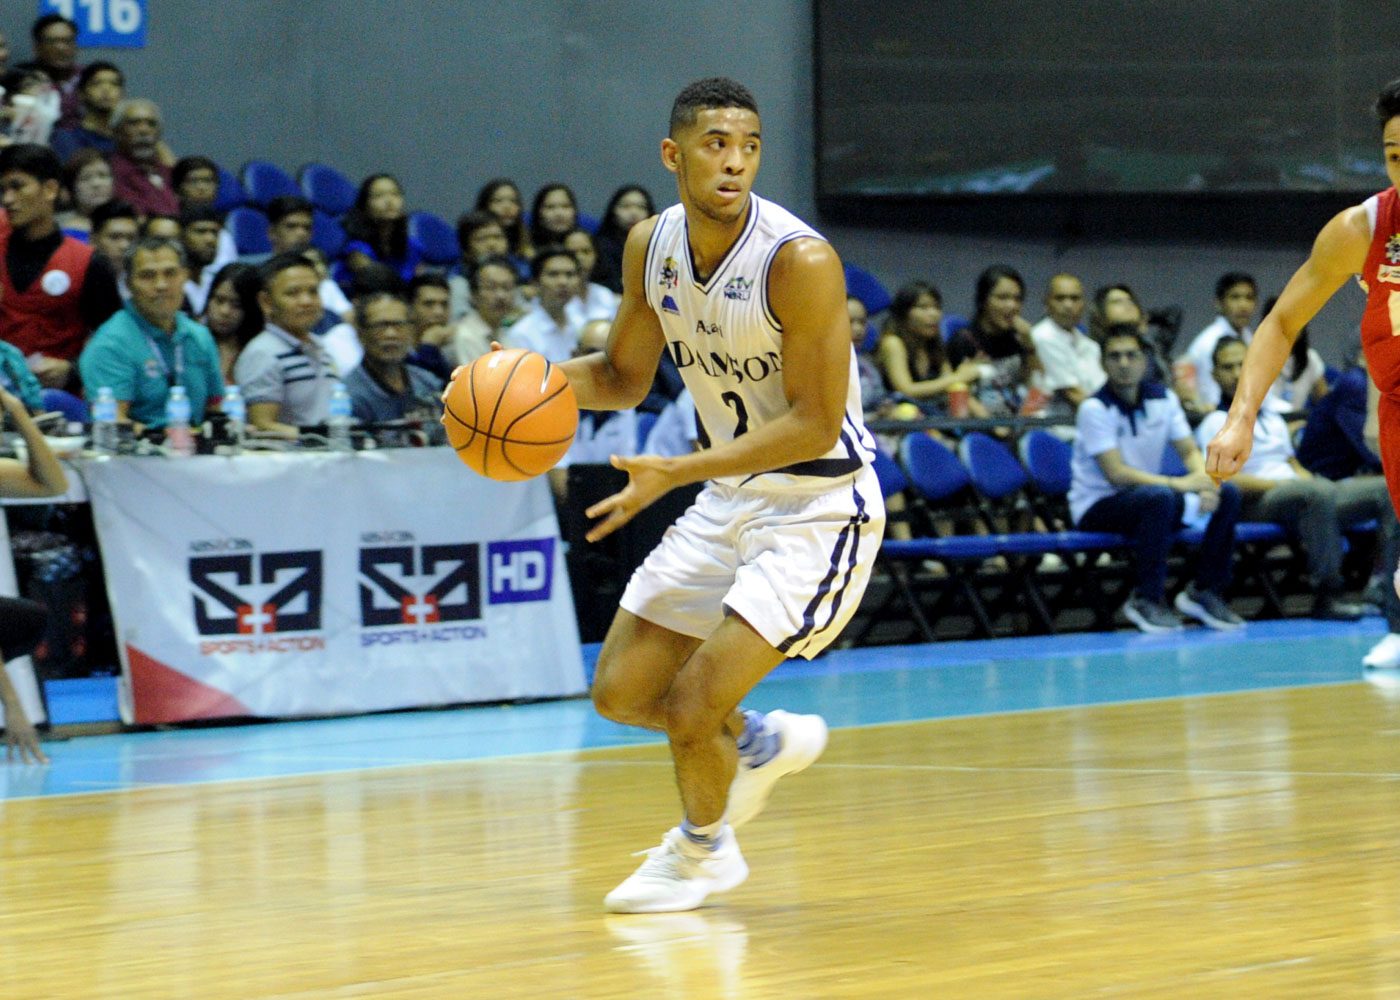 WATCH: Adamson believes it’s time to take the next step